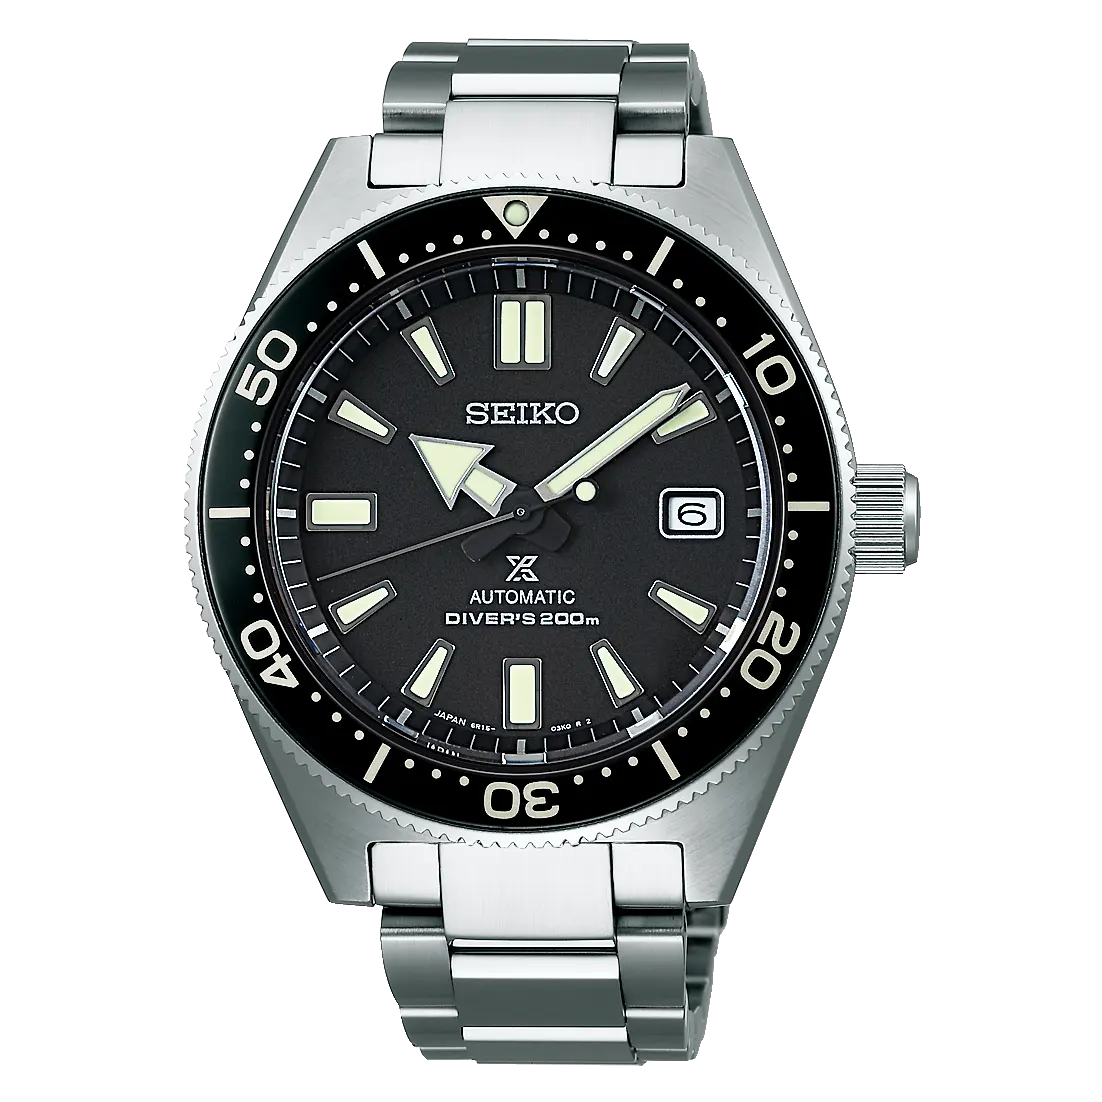 New 2019 All Stainless Steel Oem 200M Mens Diver Watches Automatic